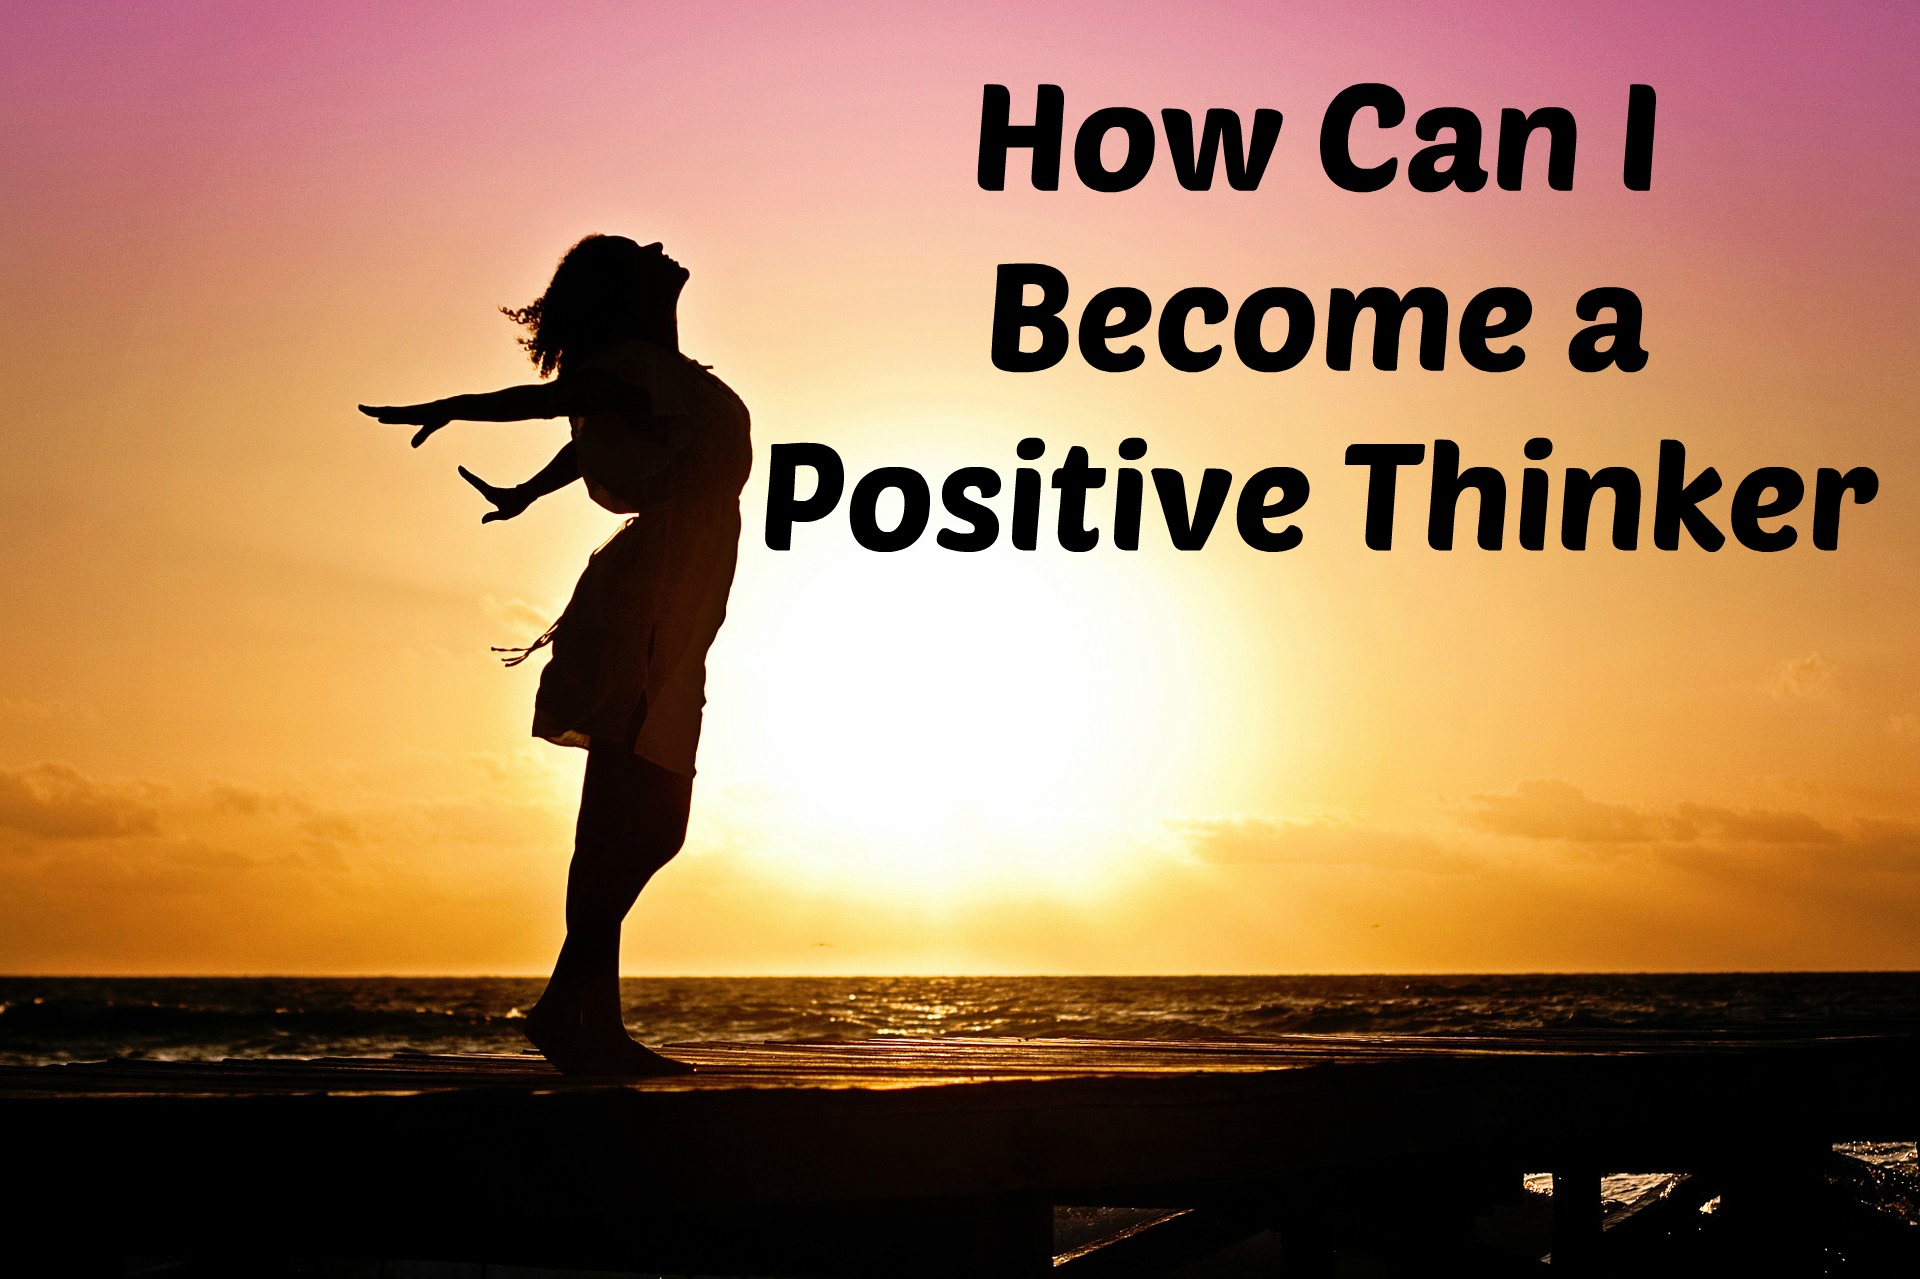 How Can I Become a Positive Thinker